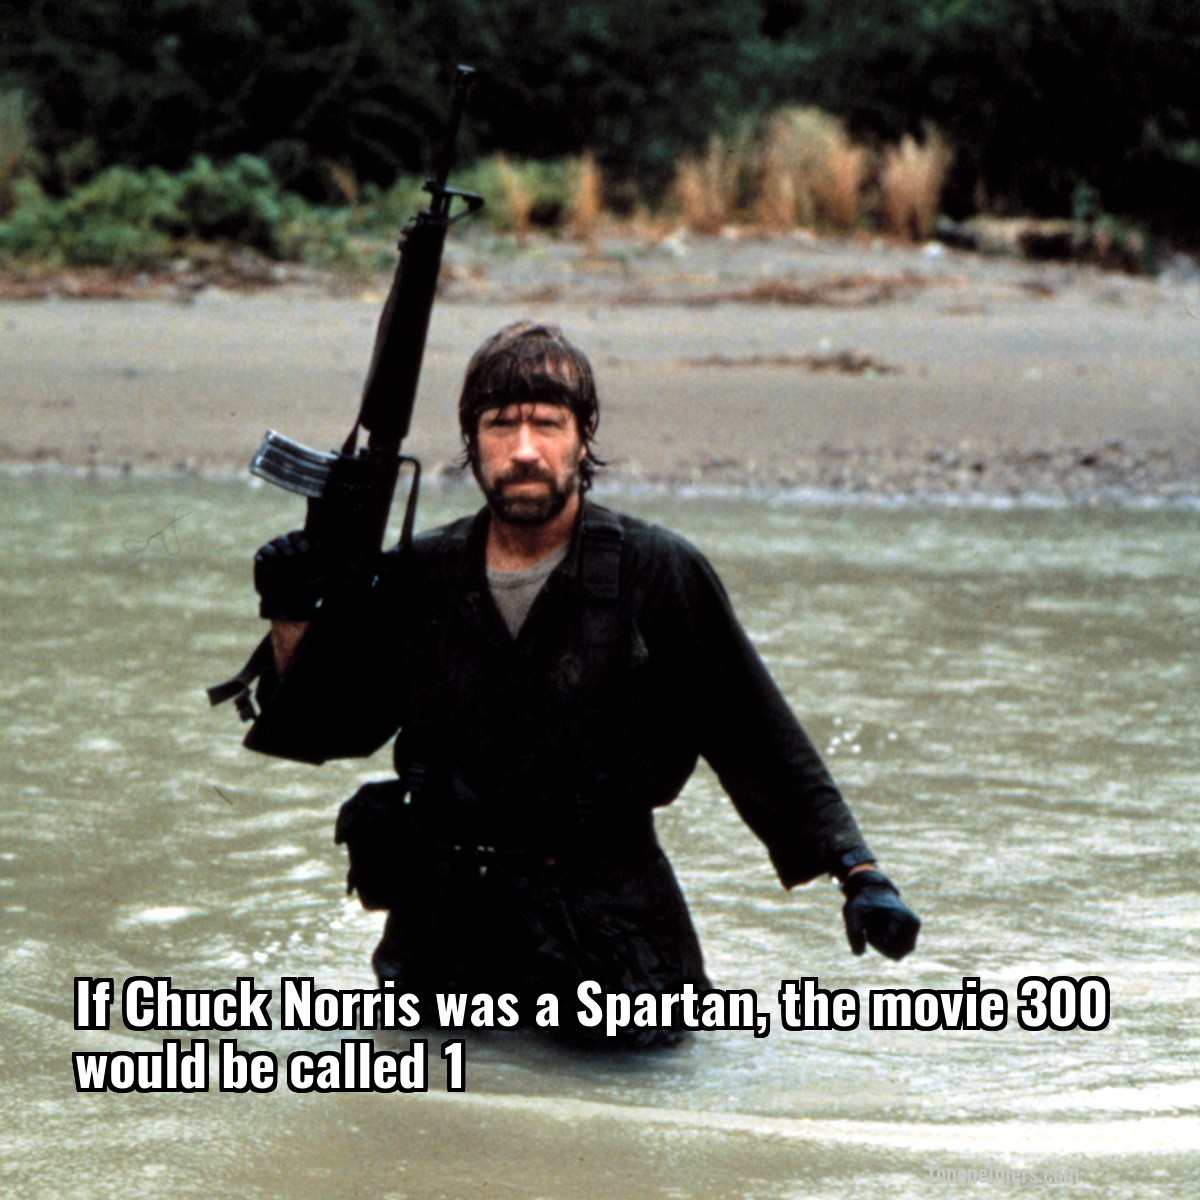 If Chuck Norris was a Spartan, the movie 300 would be called 1